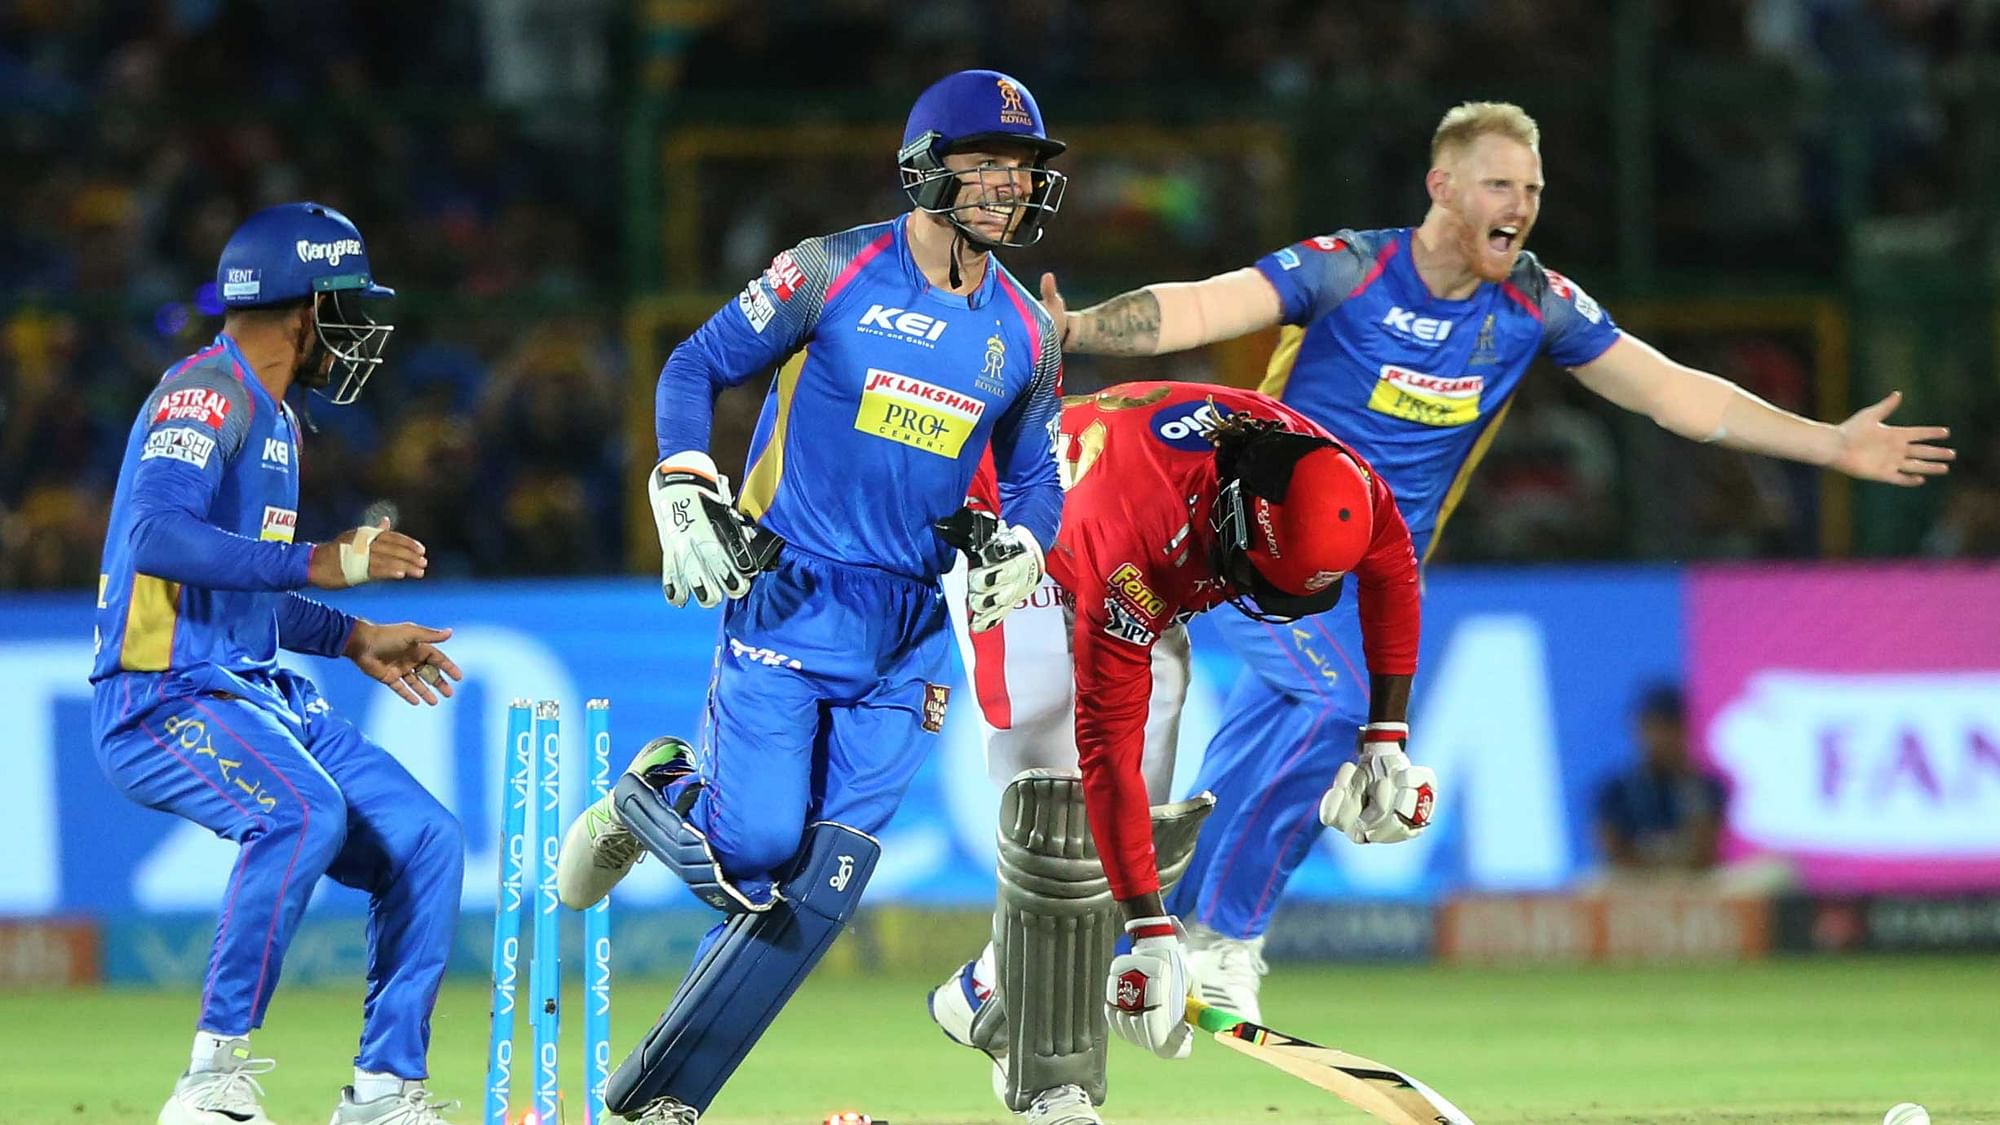 Rajasthan Royals players celebrate the wicket of Chris Gayle in the third over of the Kings XI Punjab chase.